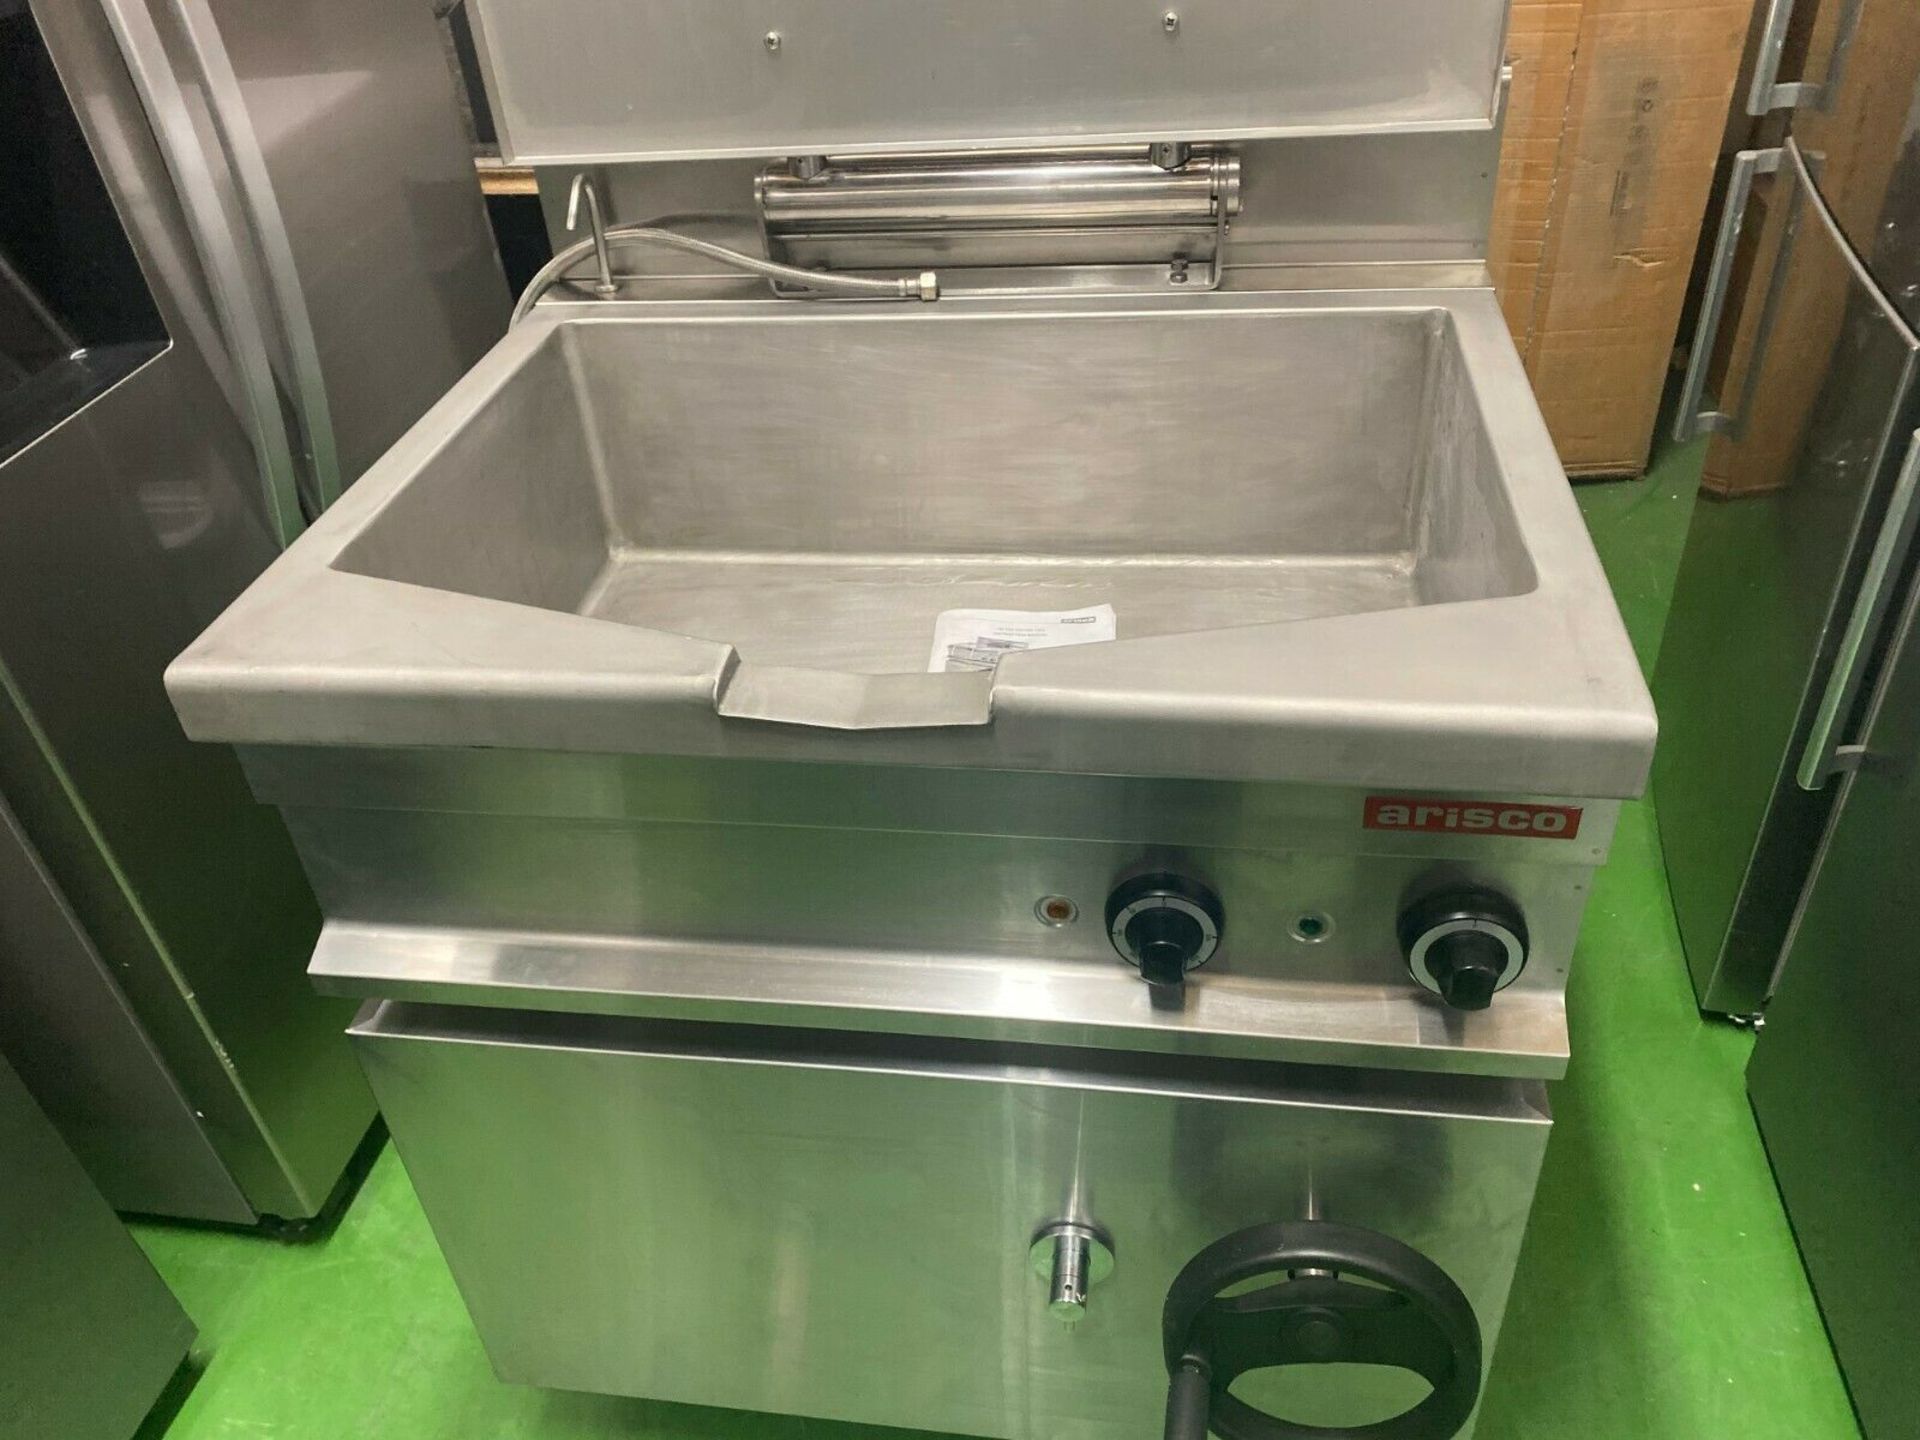 1 x Arisco EP722 Tilting Brat Pan - 3 Phase Electric - CL531 - Location: Essex - Image 2 of 3